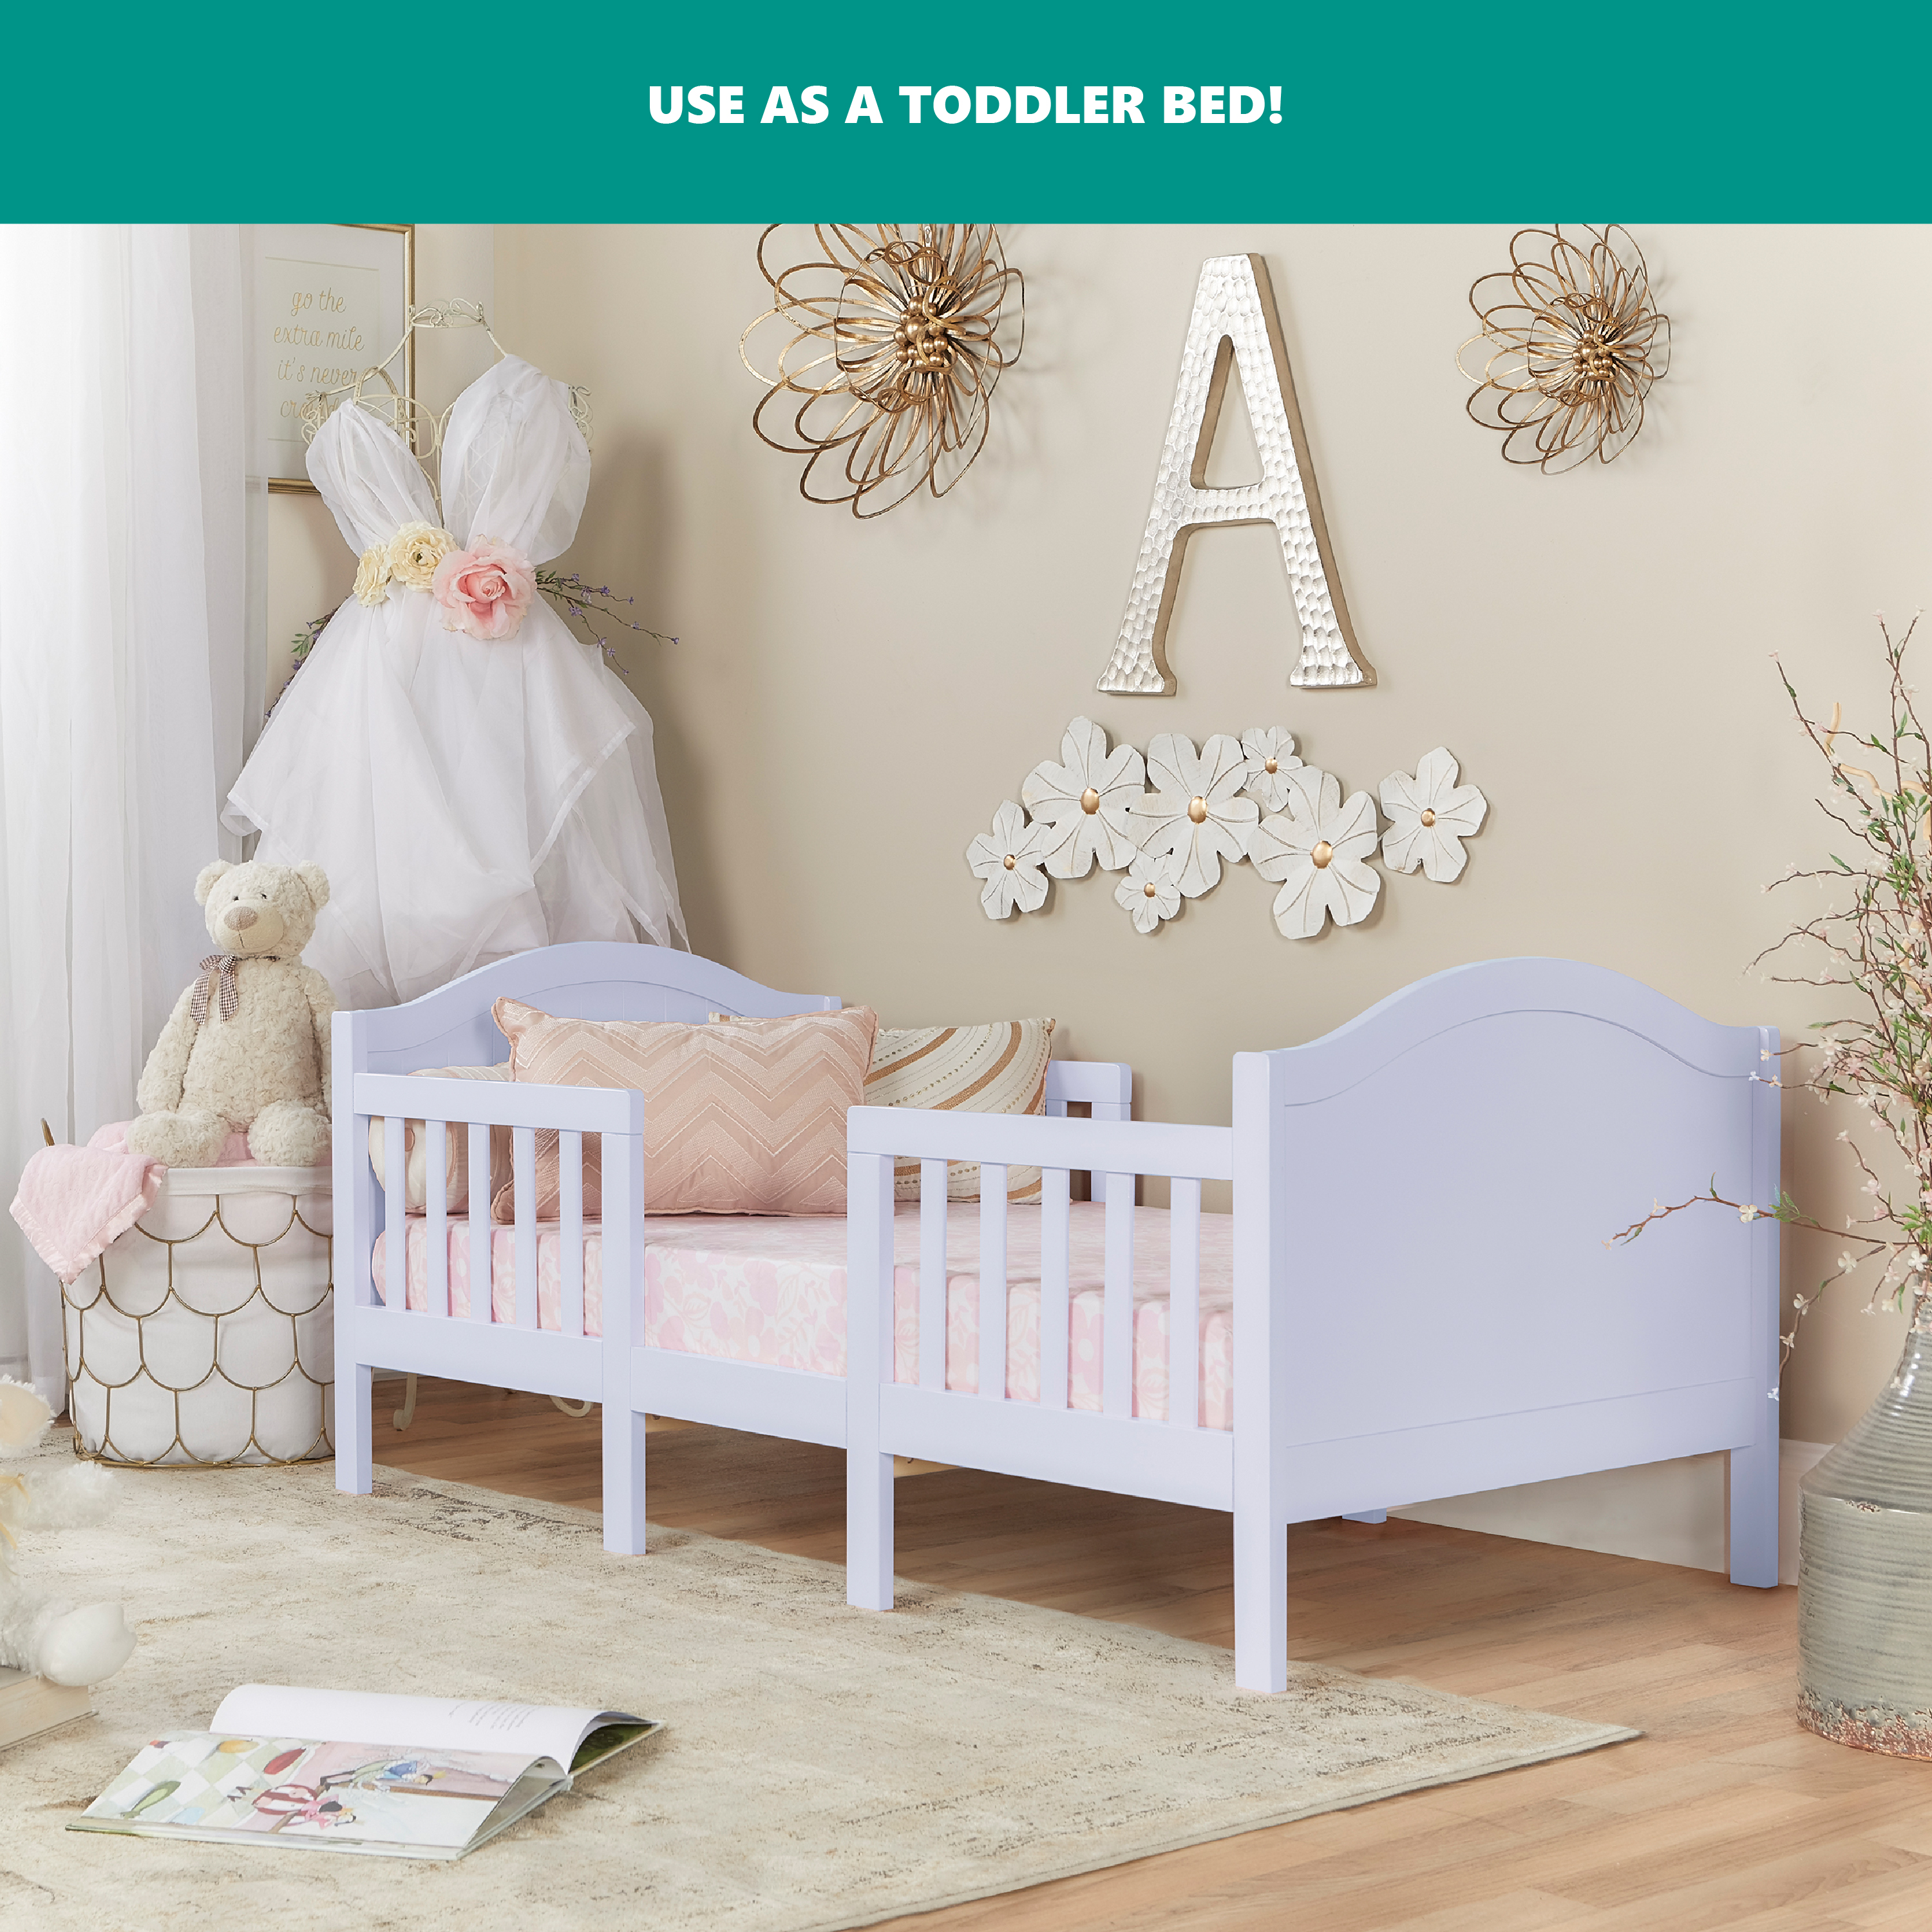 Dream On Me Portland 3 in 1 Convertible Toddler Bed, Lavender Ice - image 2 of 20